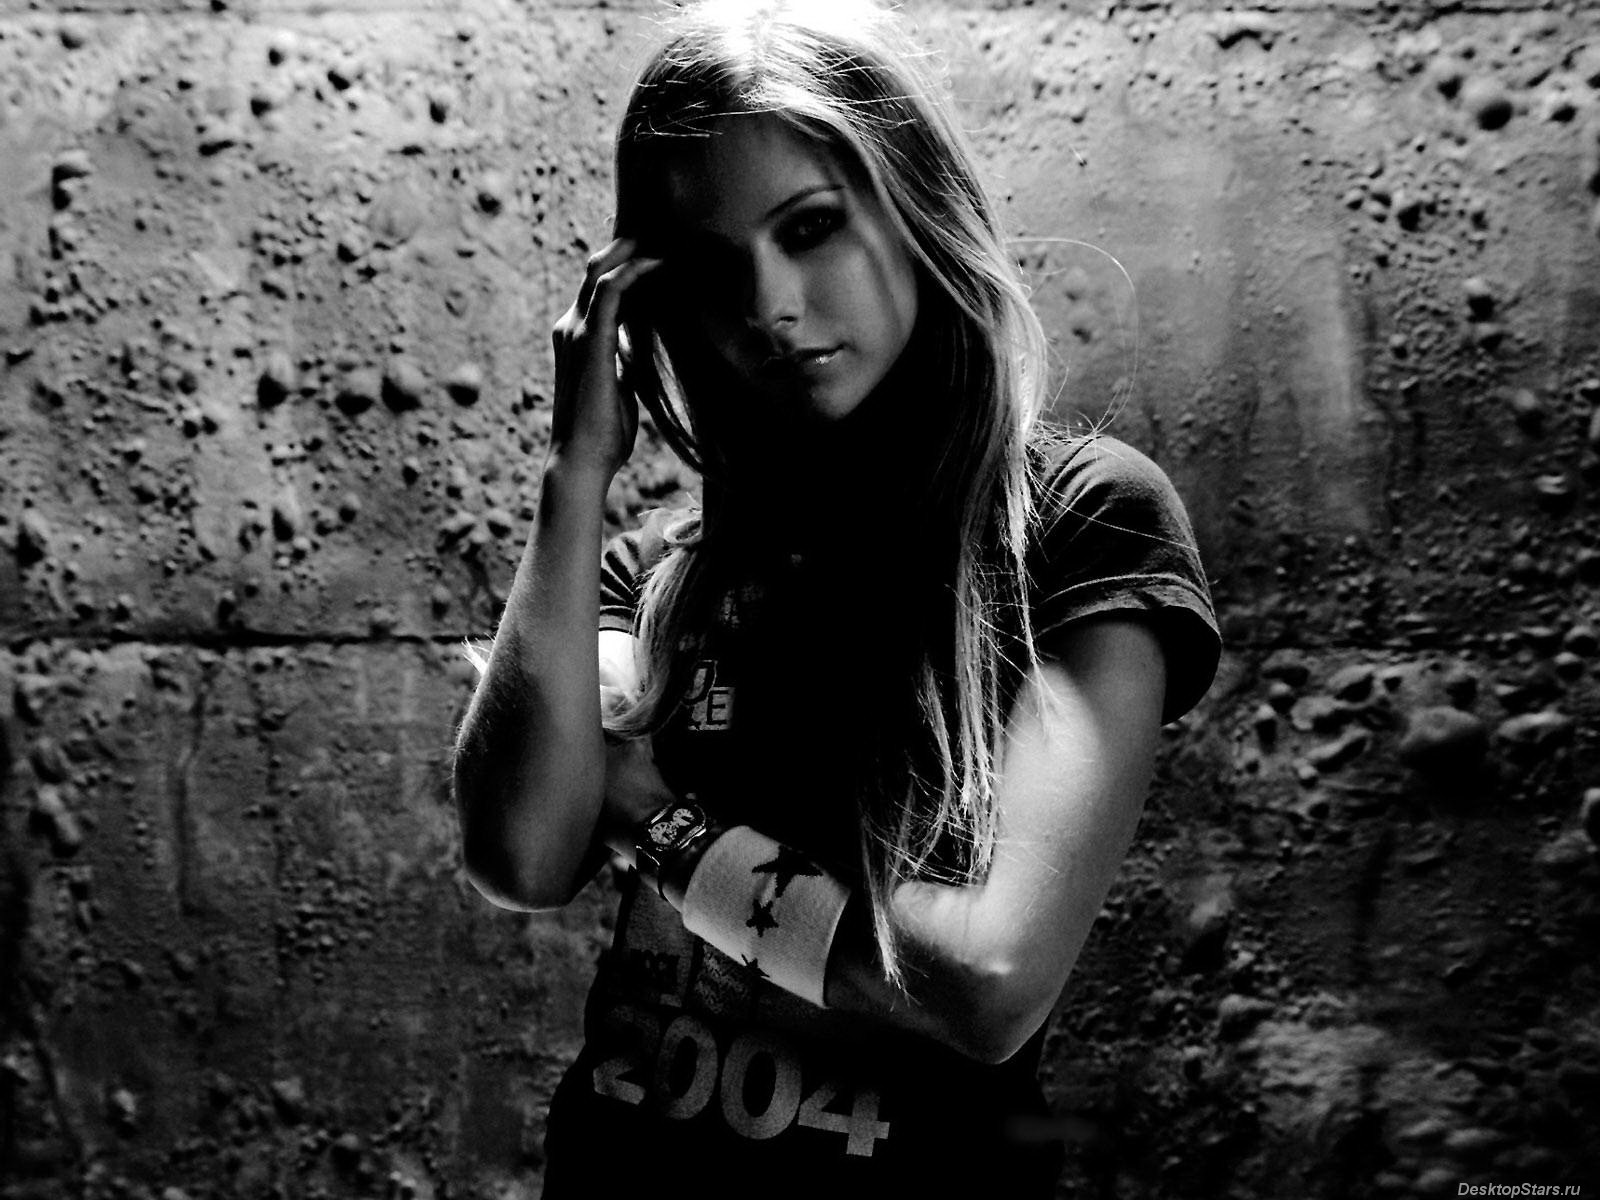 Avril Lavigne #009 - 1600x1200 Wallpapers Pictures Photos Images